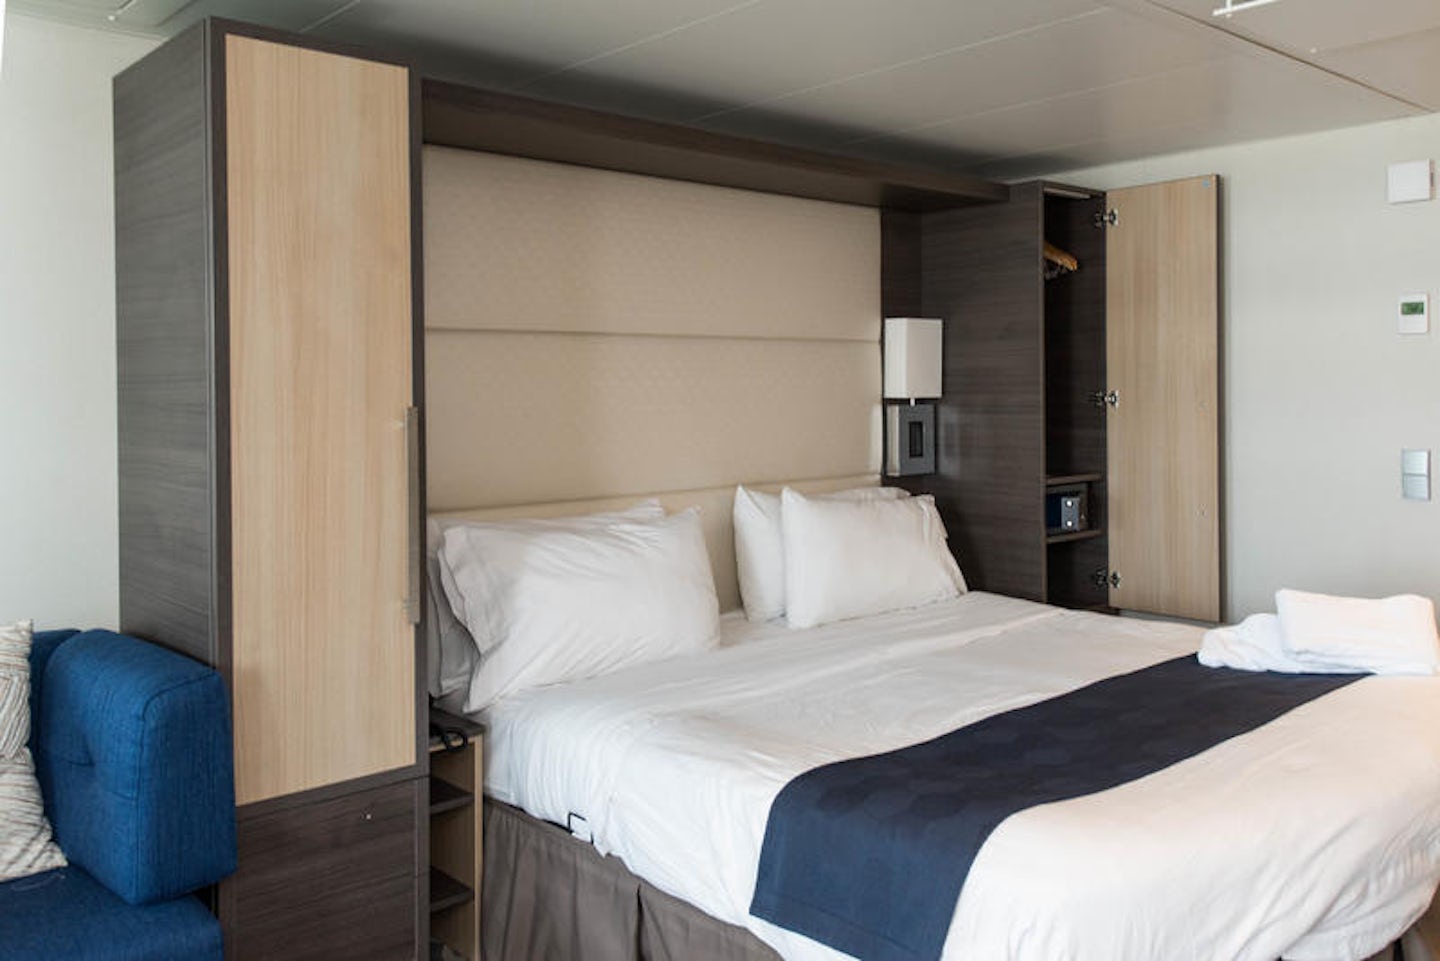 Junior Suite with Balcony on Royal Caribbean Anthem of the Seas Ship